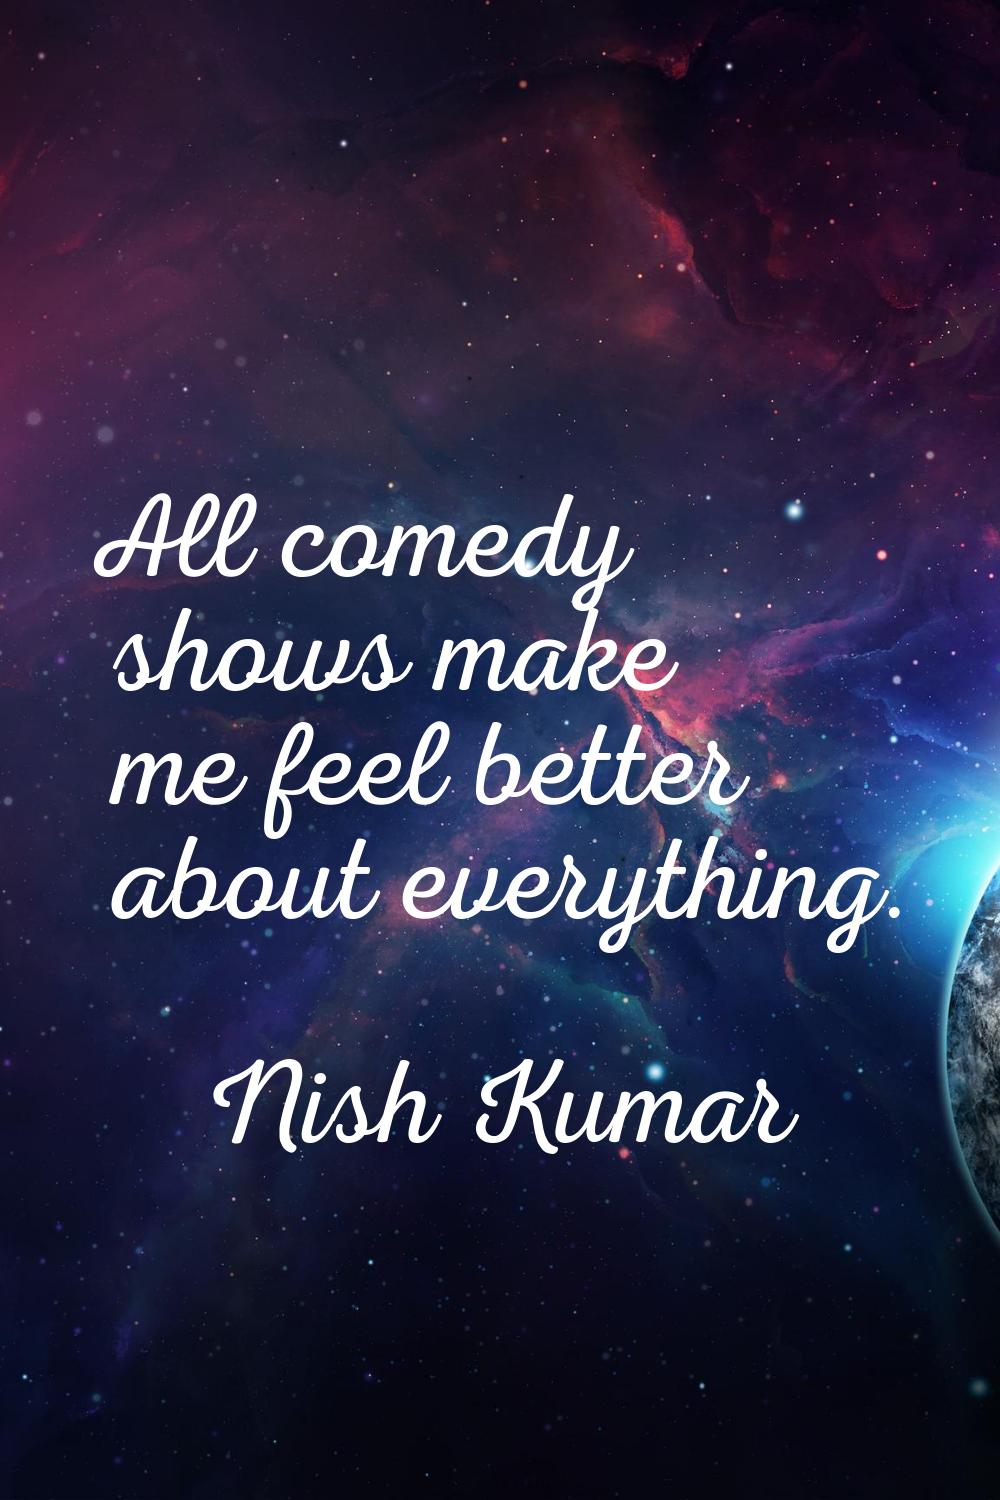 All comedy shows make me feel better about everything.